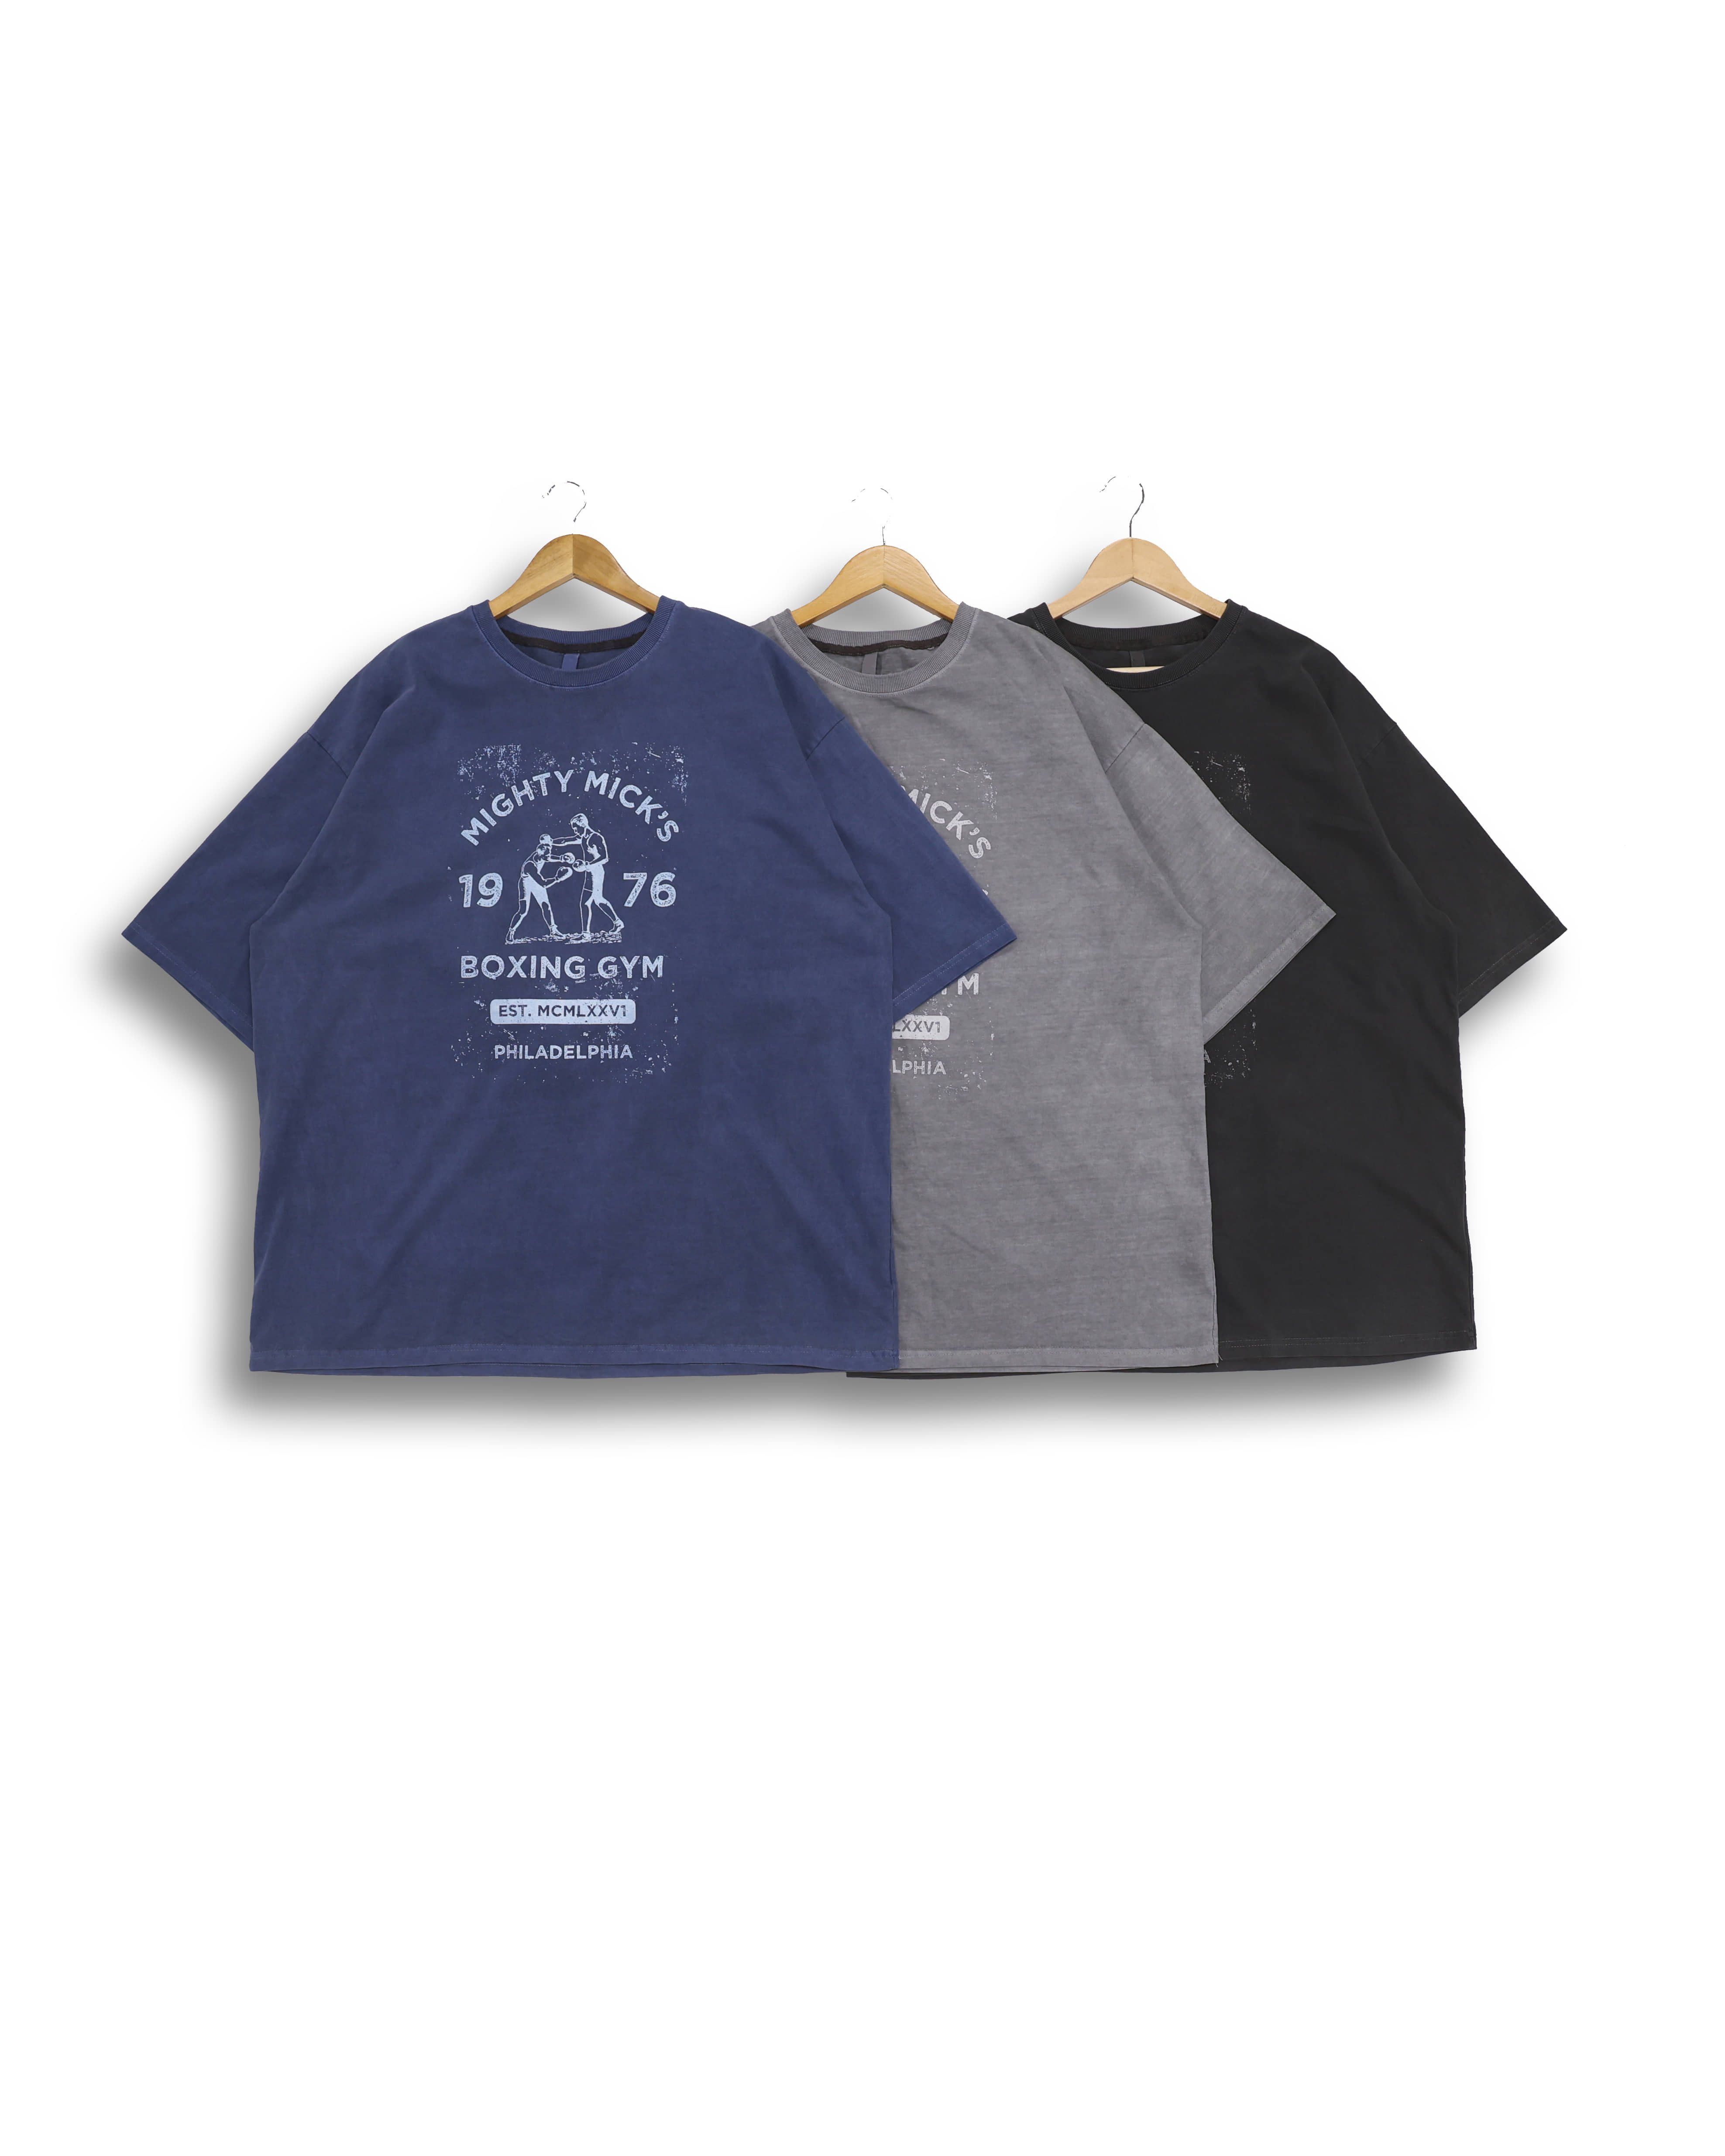 MIGHTY Boxing Gym Pigments T Shirts (Charcoal/Navy/Gray)